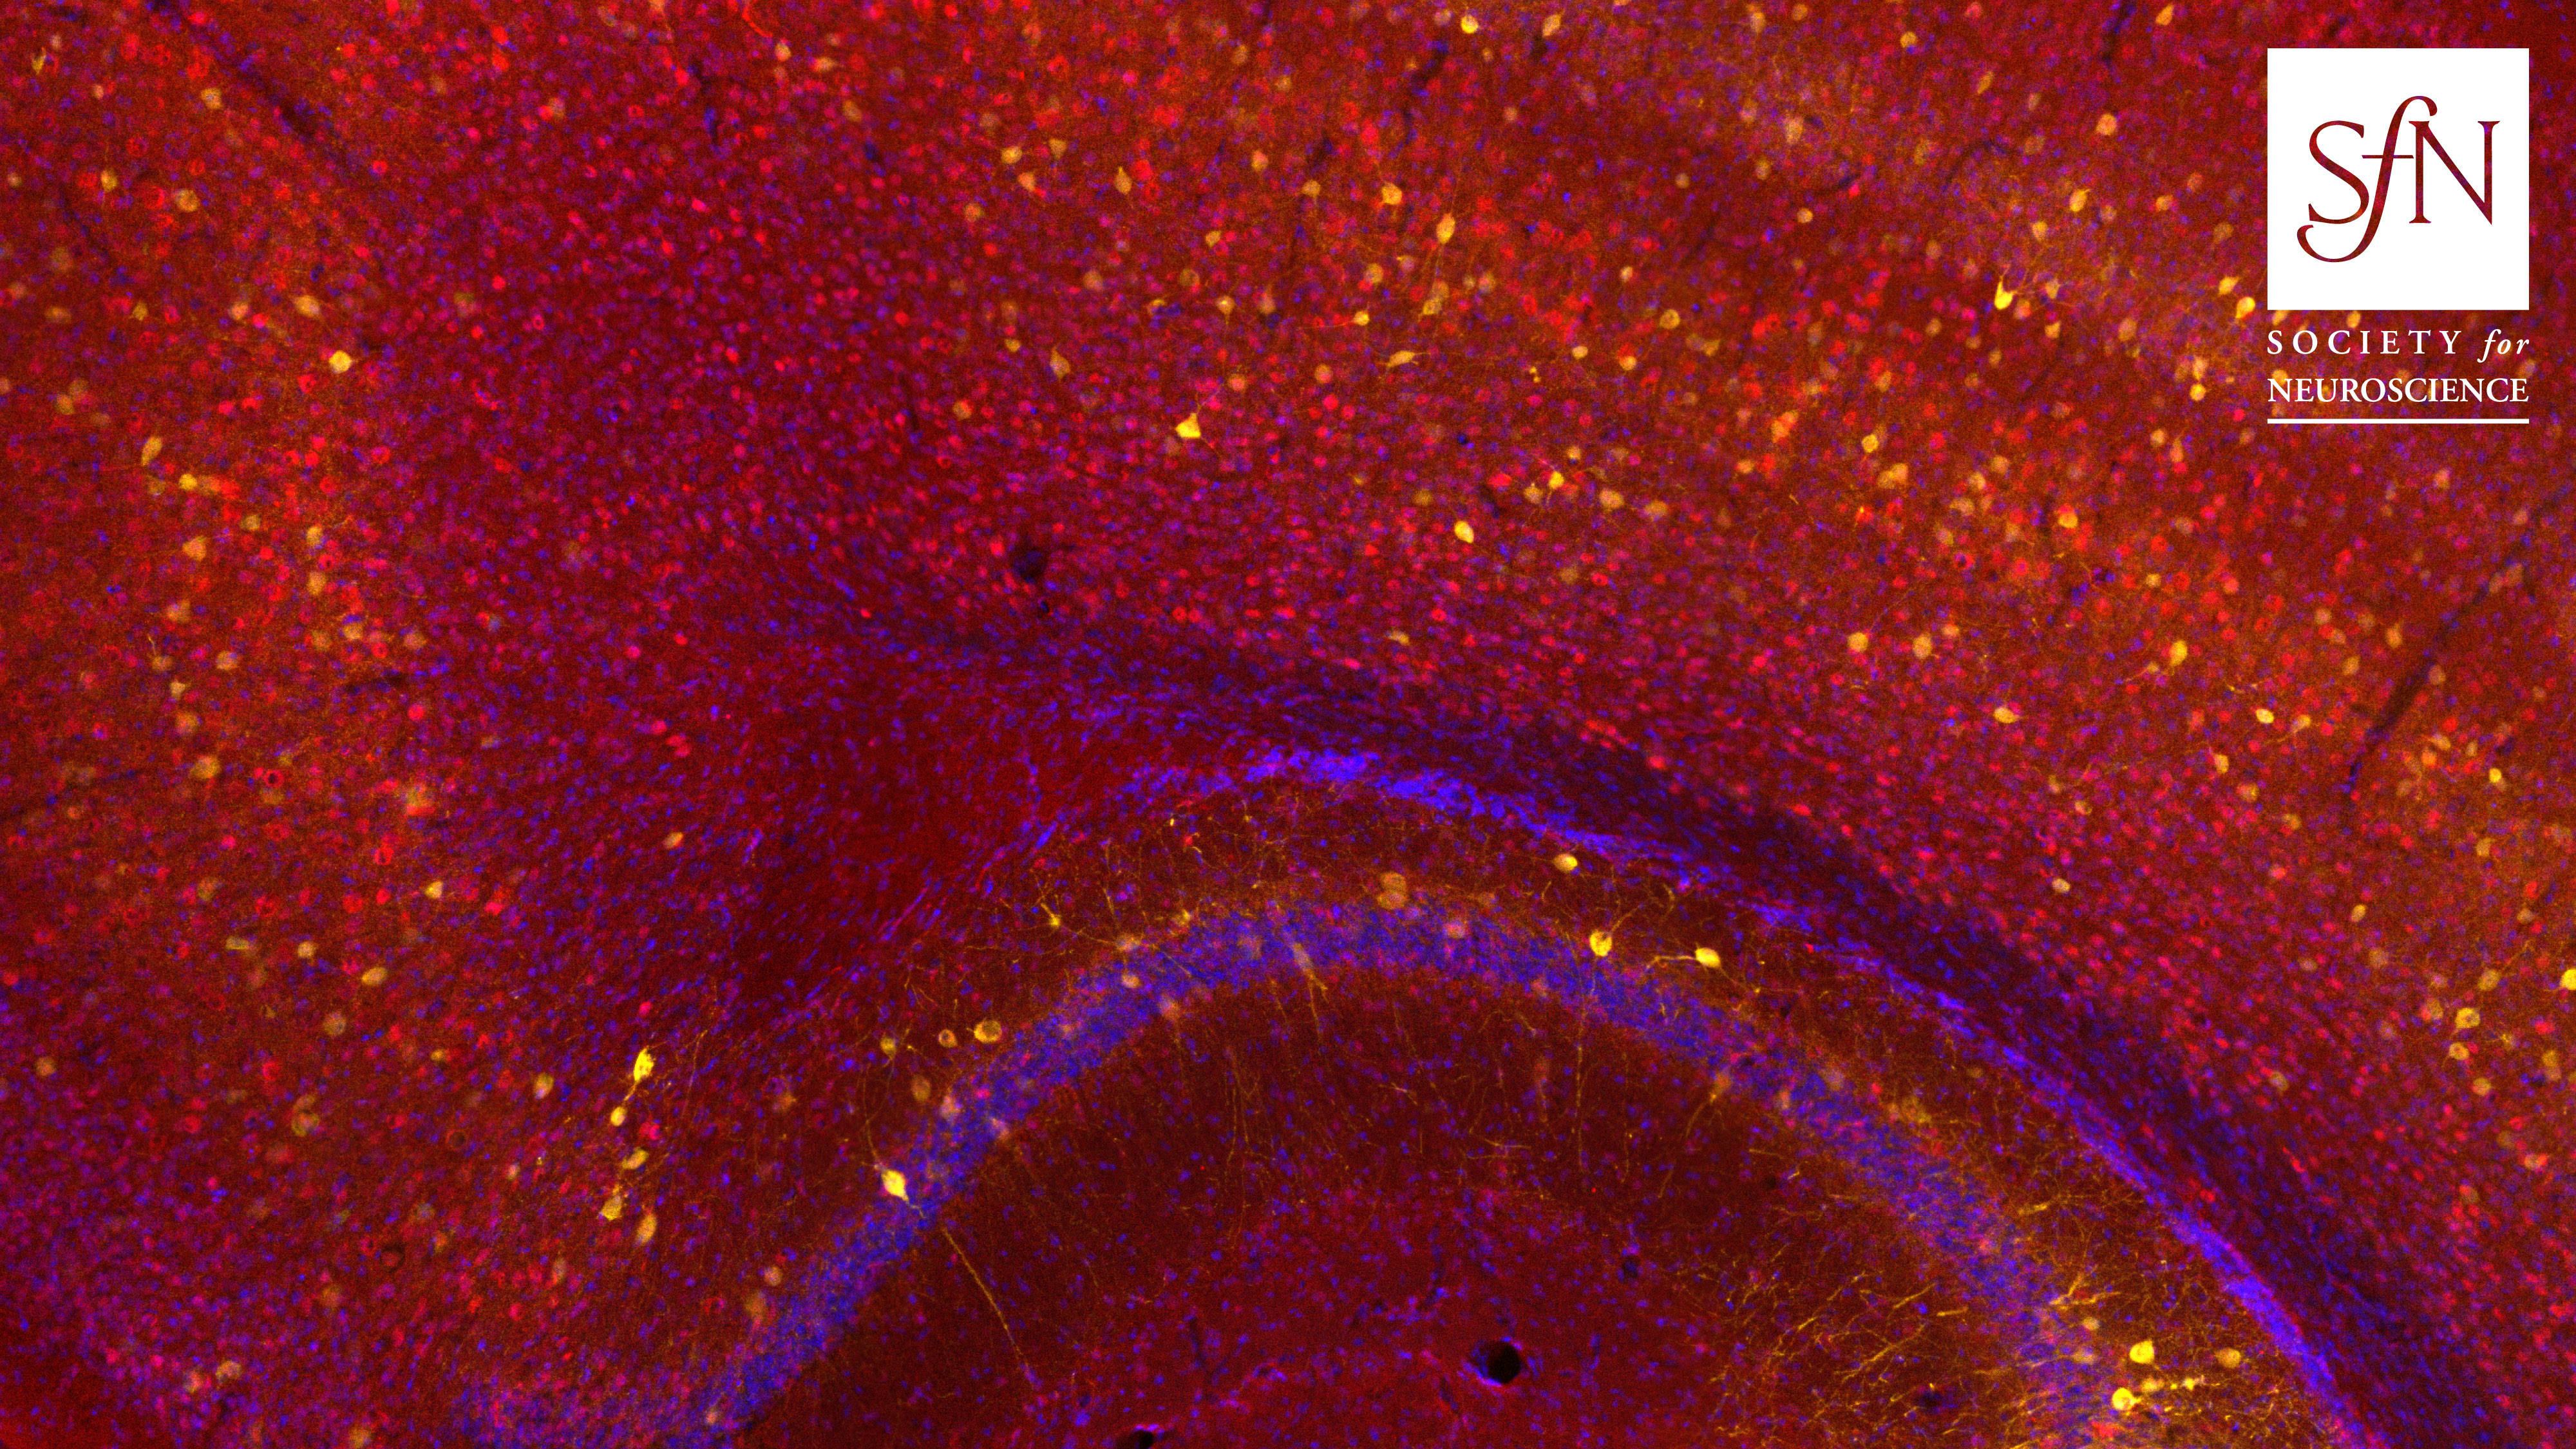 This image shows parvalbumin (yellow), β-catenin (red), and DAPI (blue) in an APC cKO mouse.